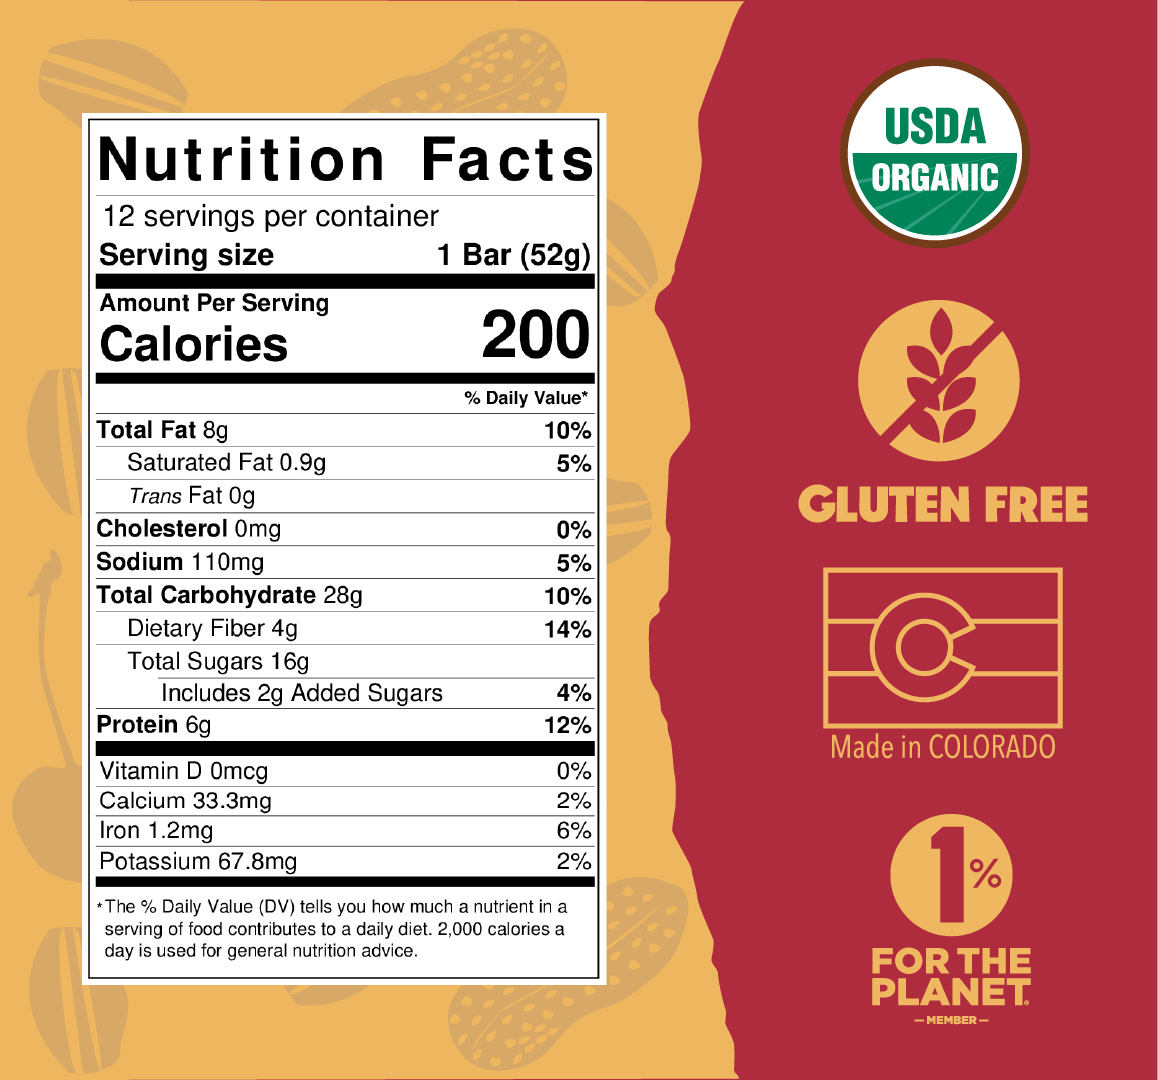 Peanuts n cherries organic certification and nutrition facts